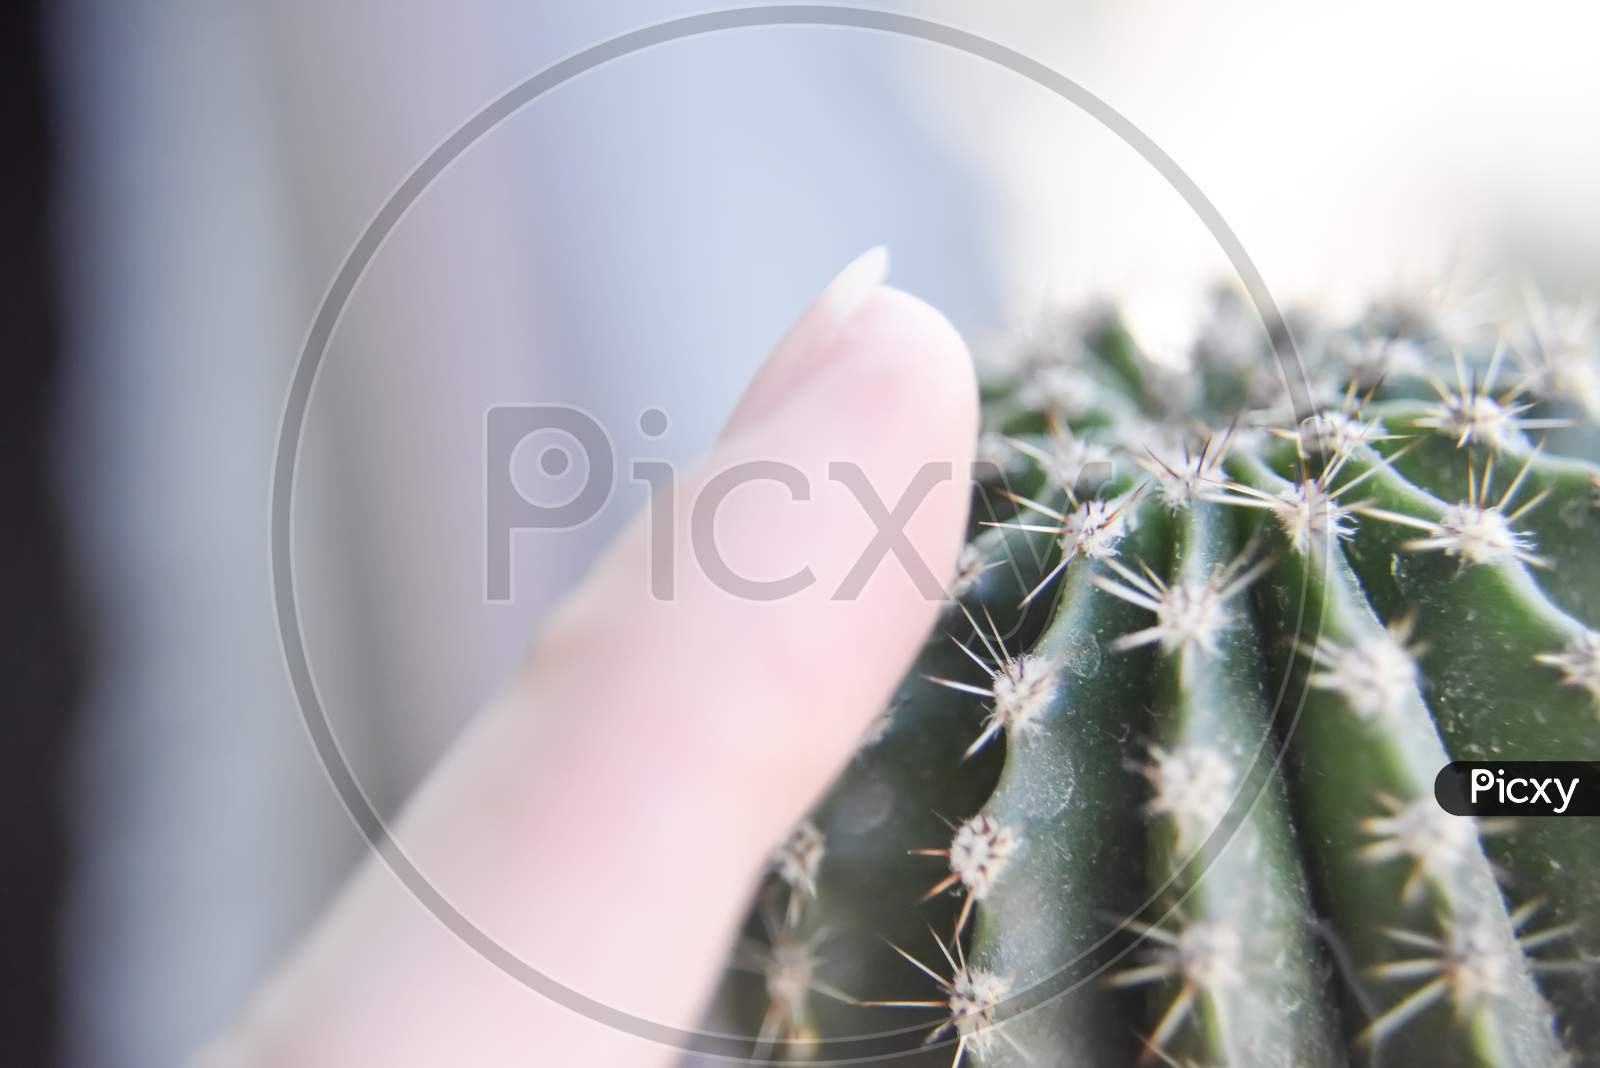 Selective Focus At The Surface Of The Cactus With The Human Finger Near It It